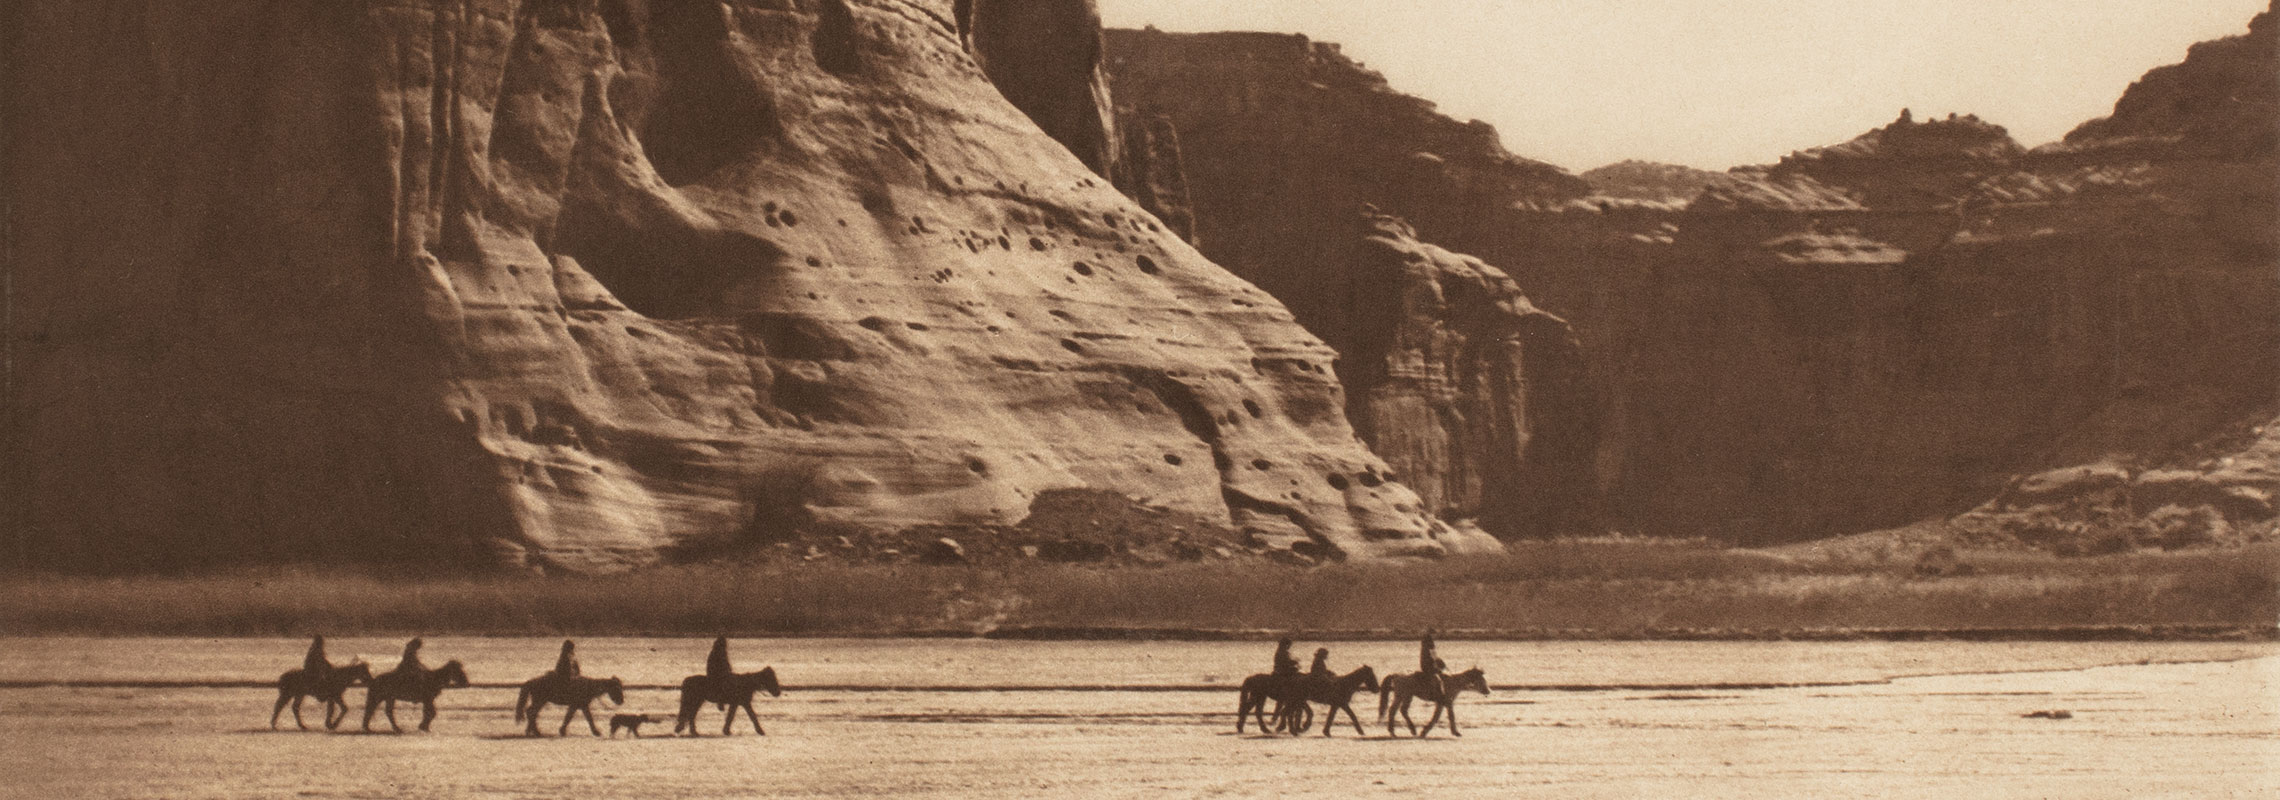 Edward S. Curtis, Printing the Legends: Looking at Shadows in a West Lit Only by Fire